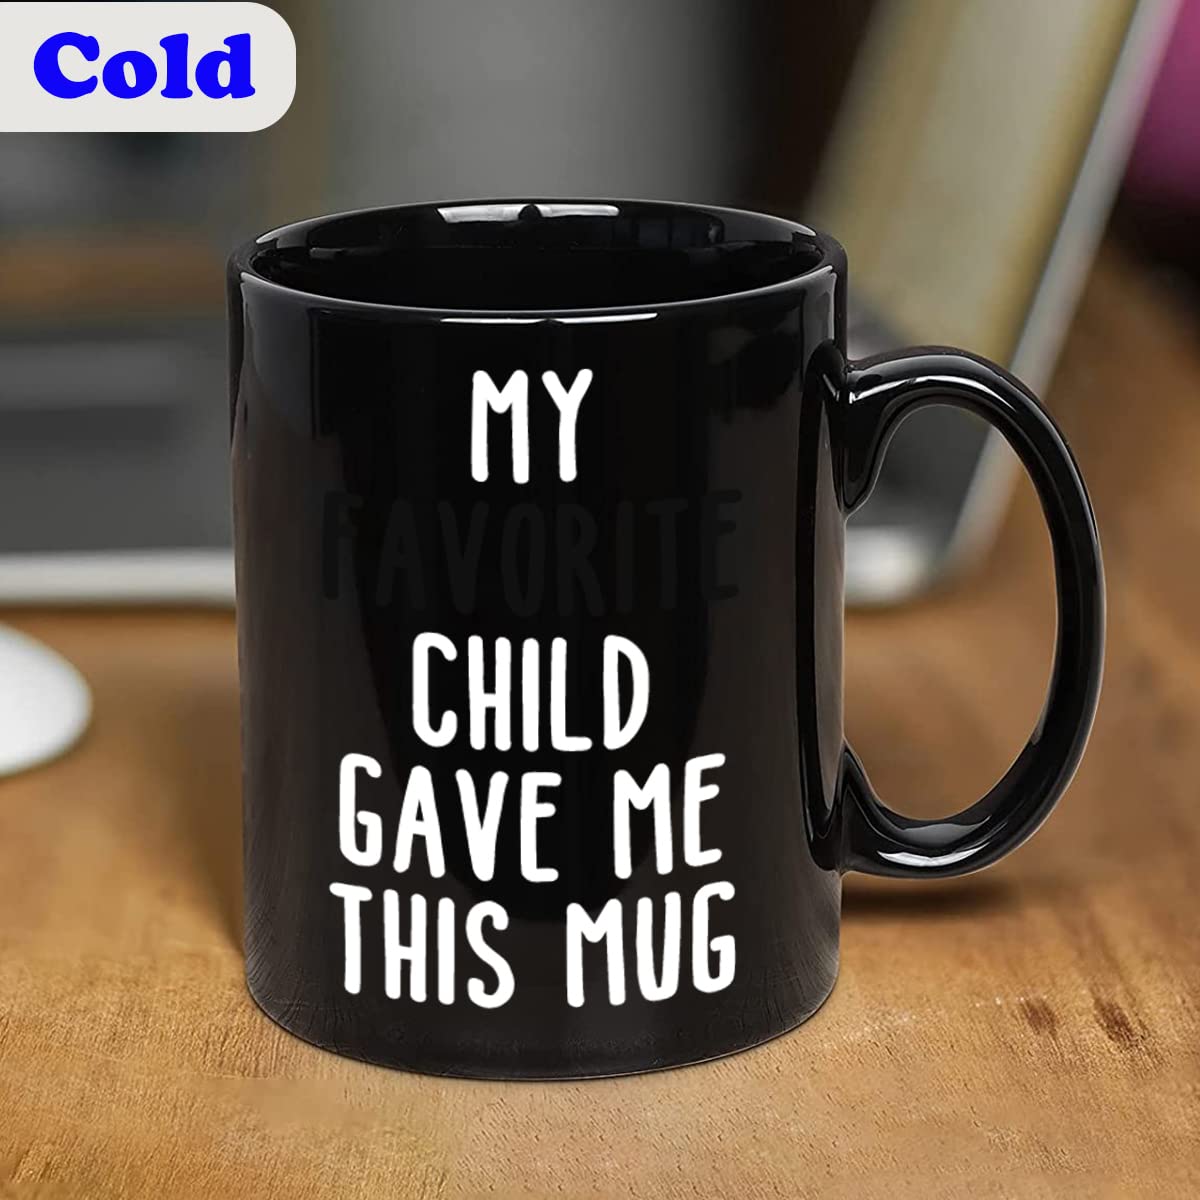 LOZACHE My Favorite Child Gave Me This Coffee Mug, Funny Color Changing Mug for Mom & Dad for Mothers & Fathers Gifts from Kids Daughter Son, Birthday Present Gifts Idea for Her Him Women Men, 11oz